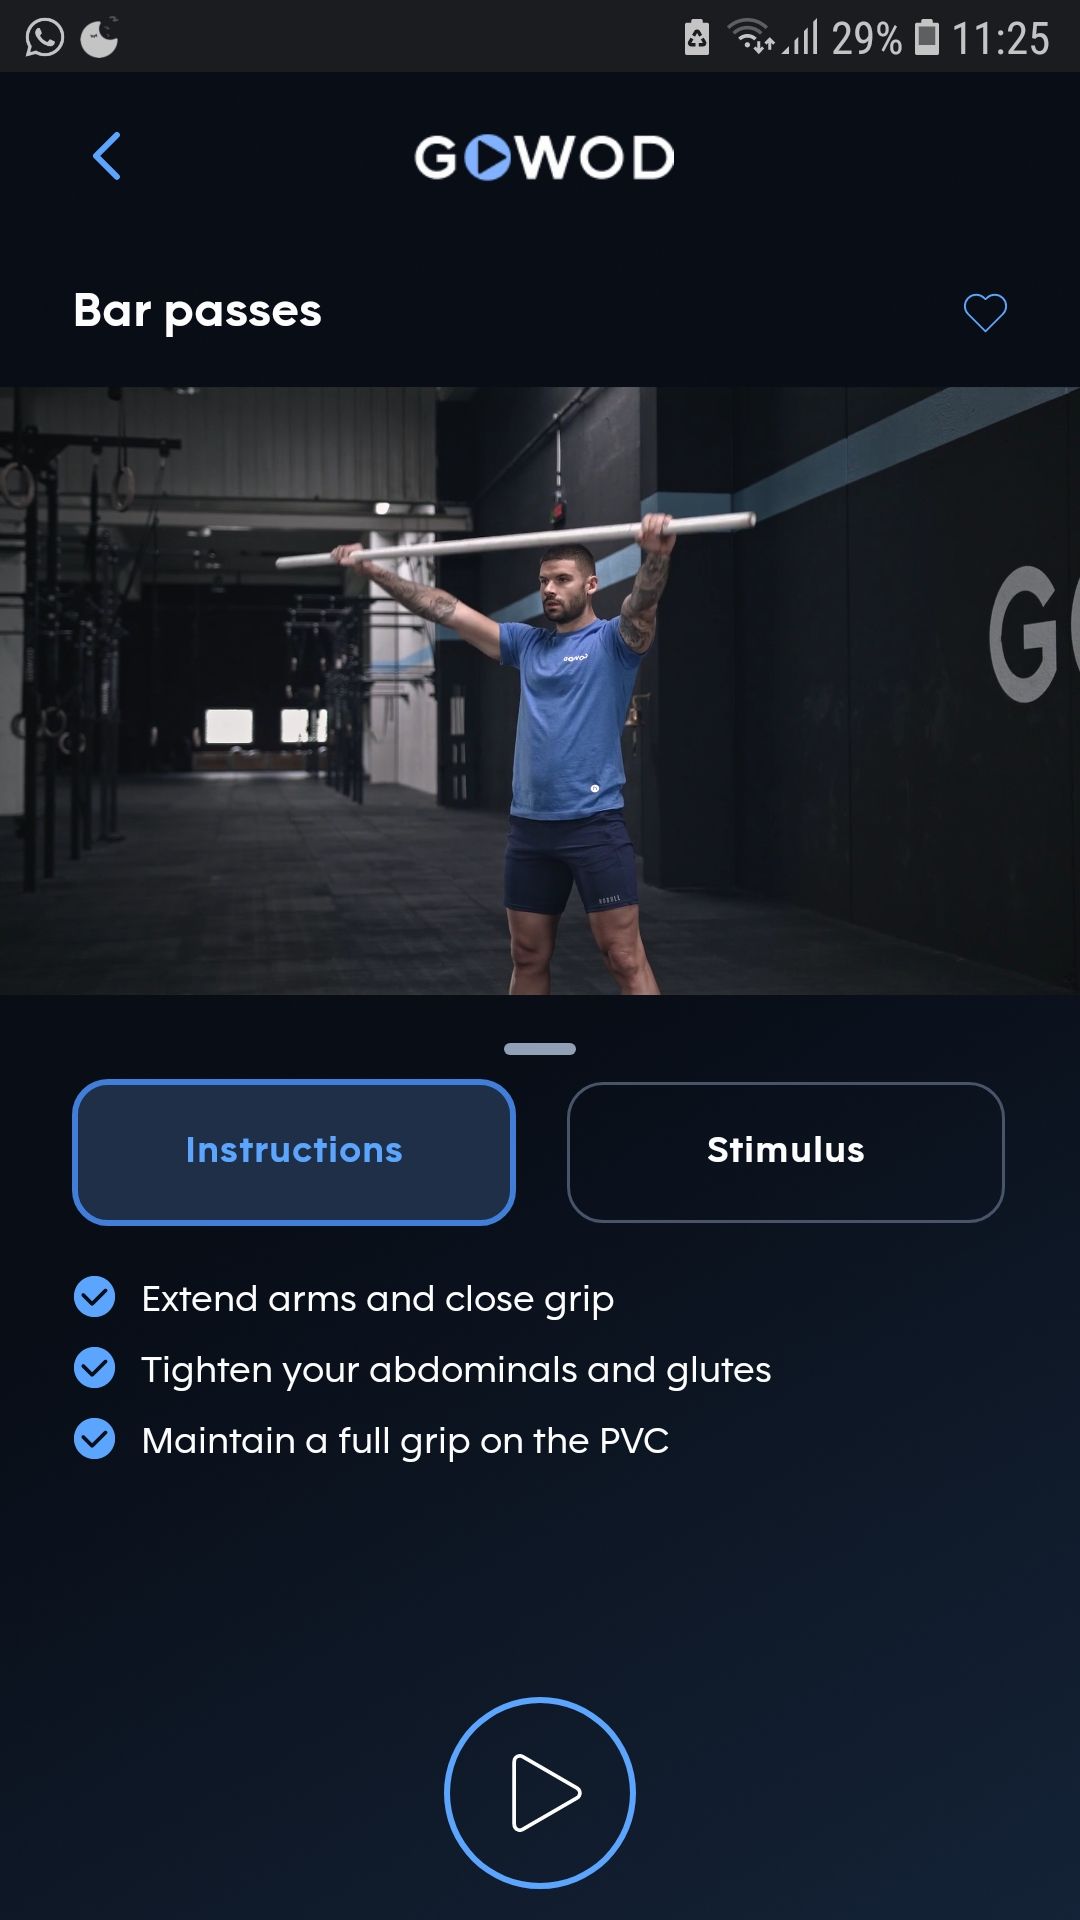 GOWOD mobile exercise app exercises